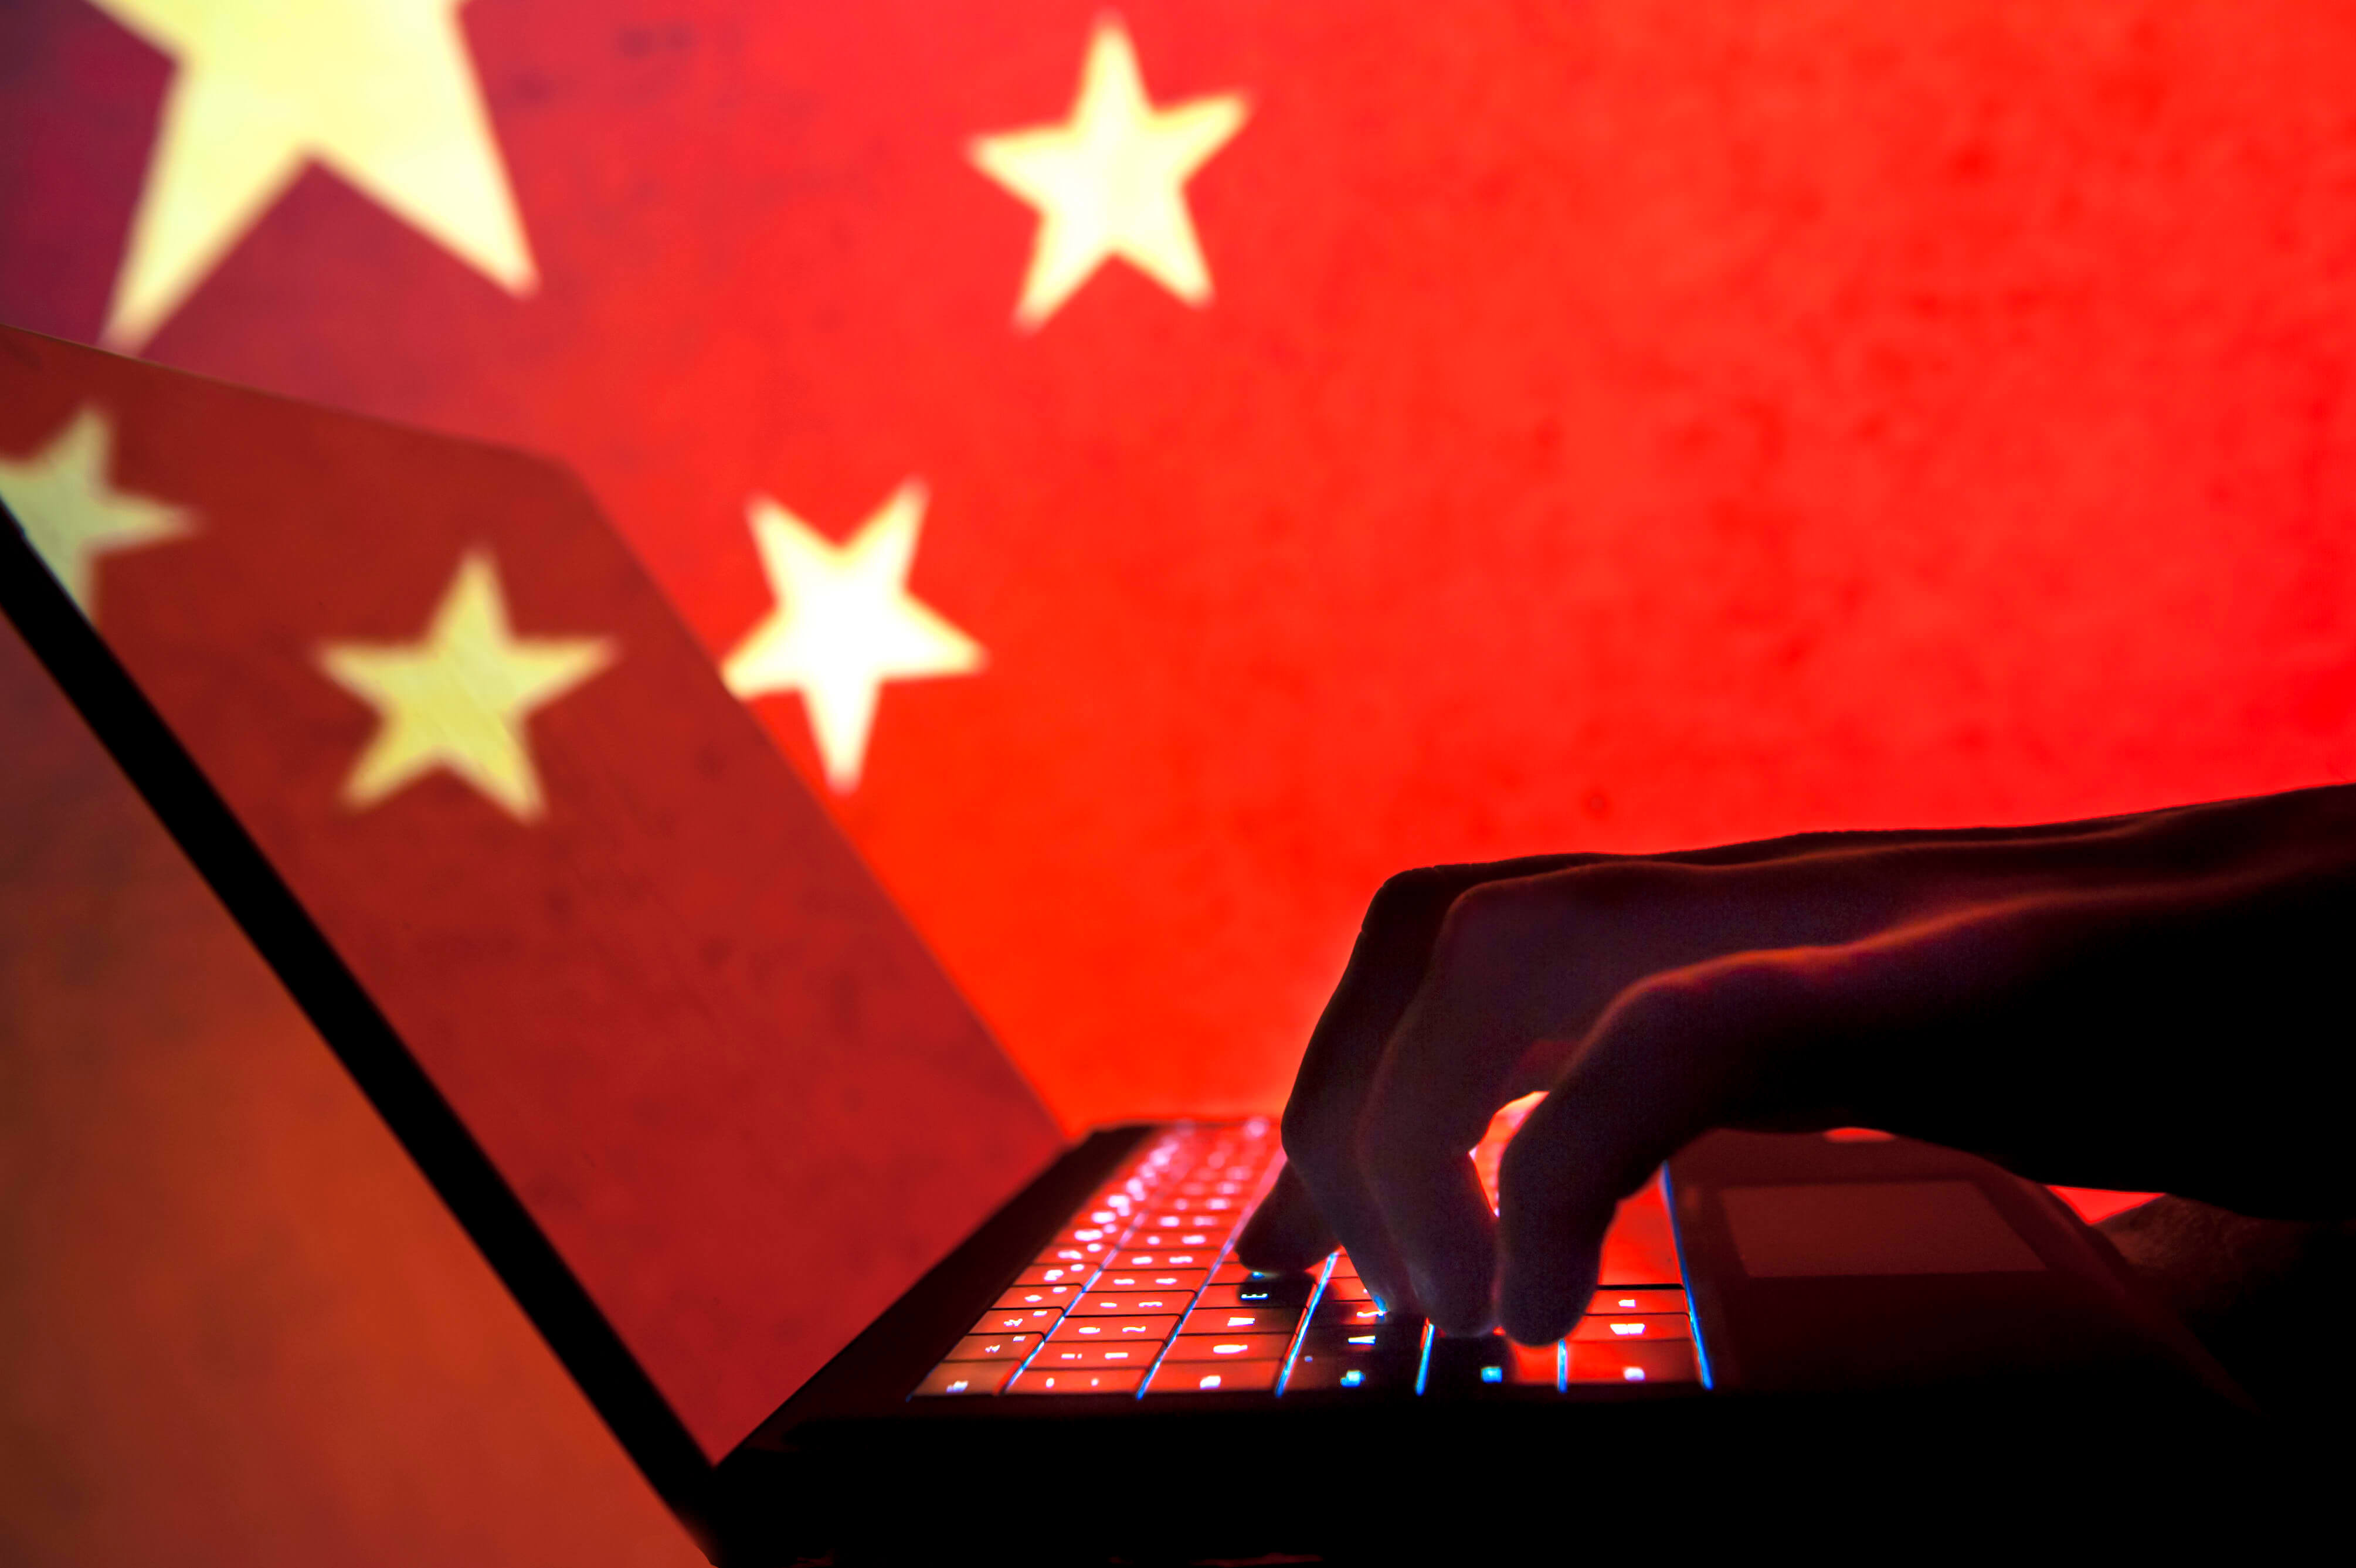 RISING CYBER ATTACKS DUE TO CHINA-INDIA BORDER CONFLICT